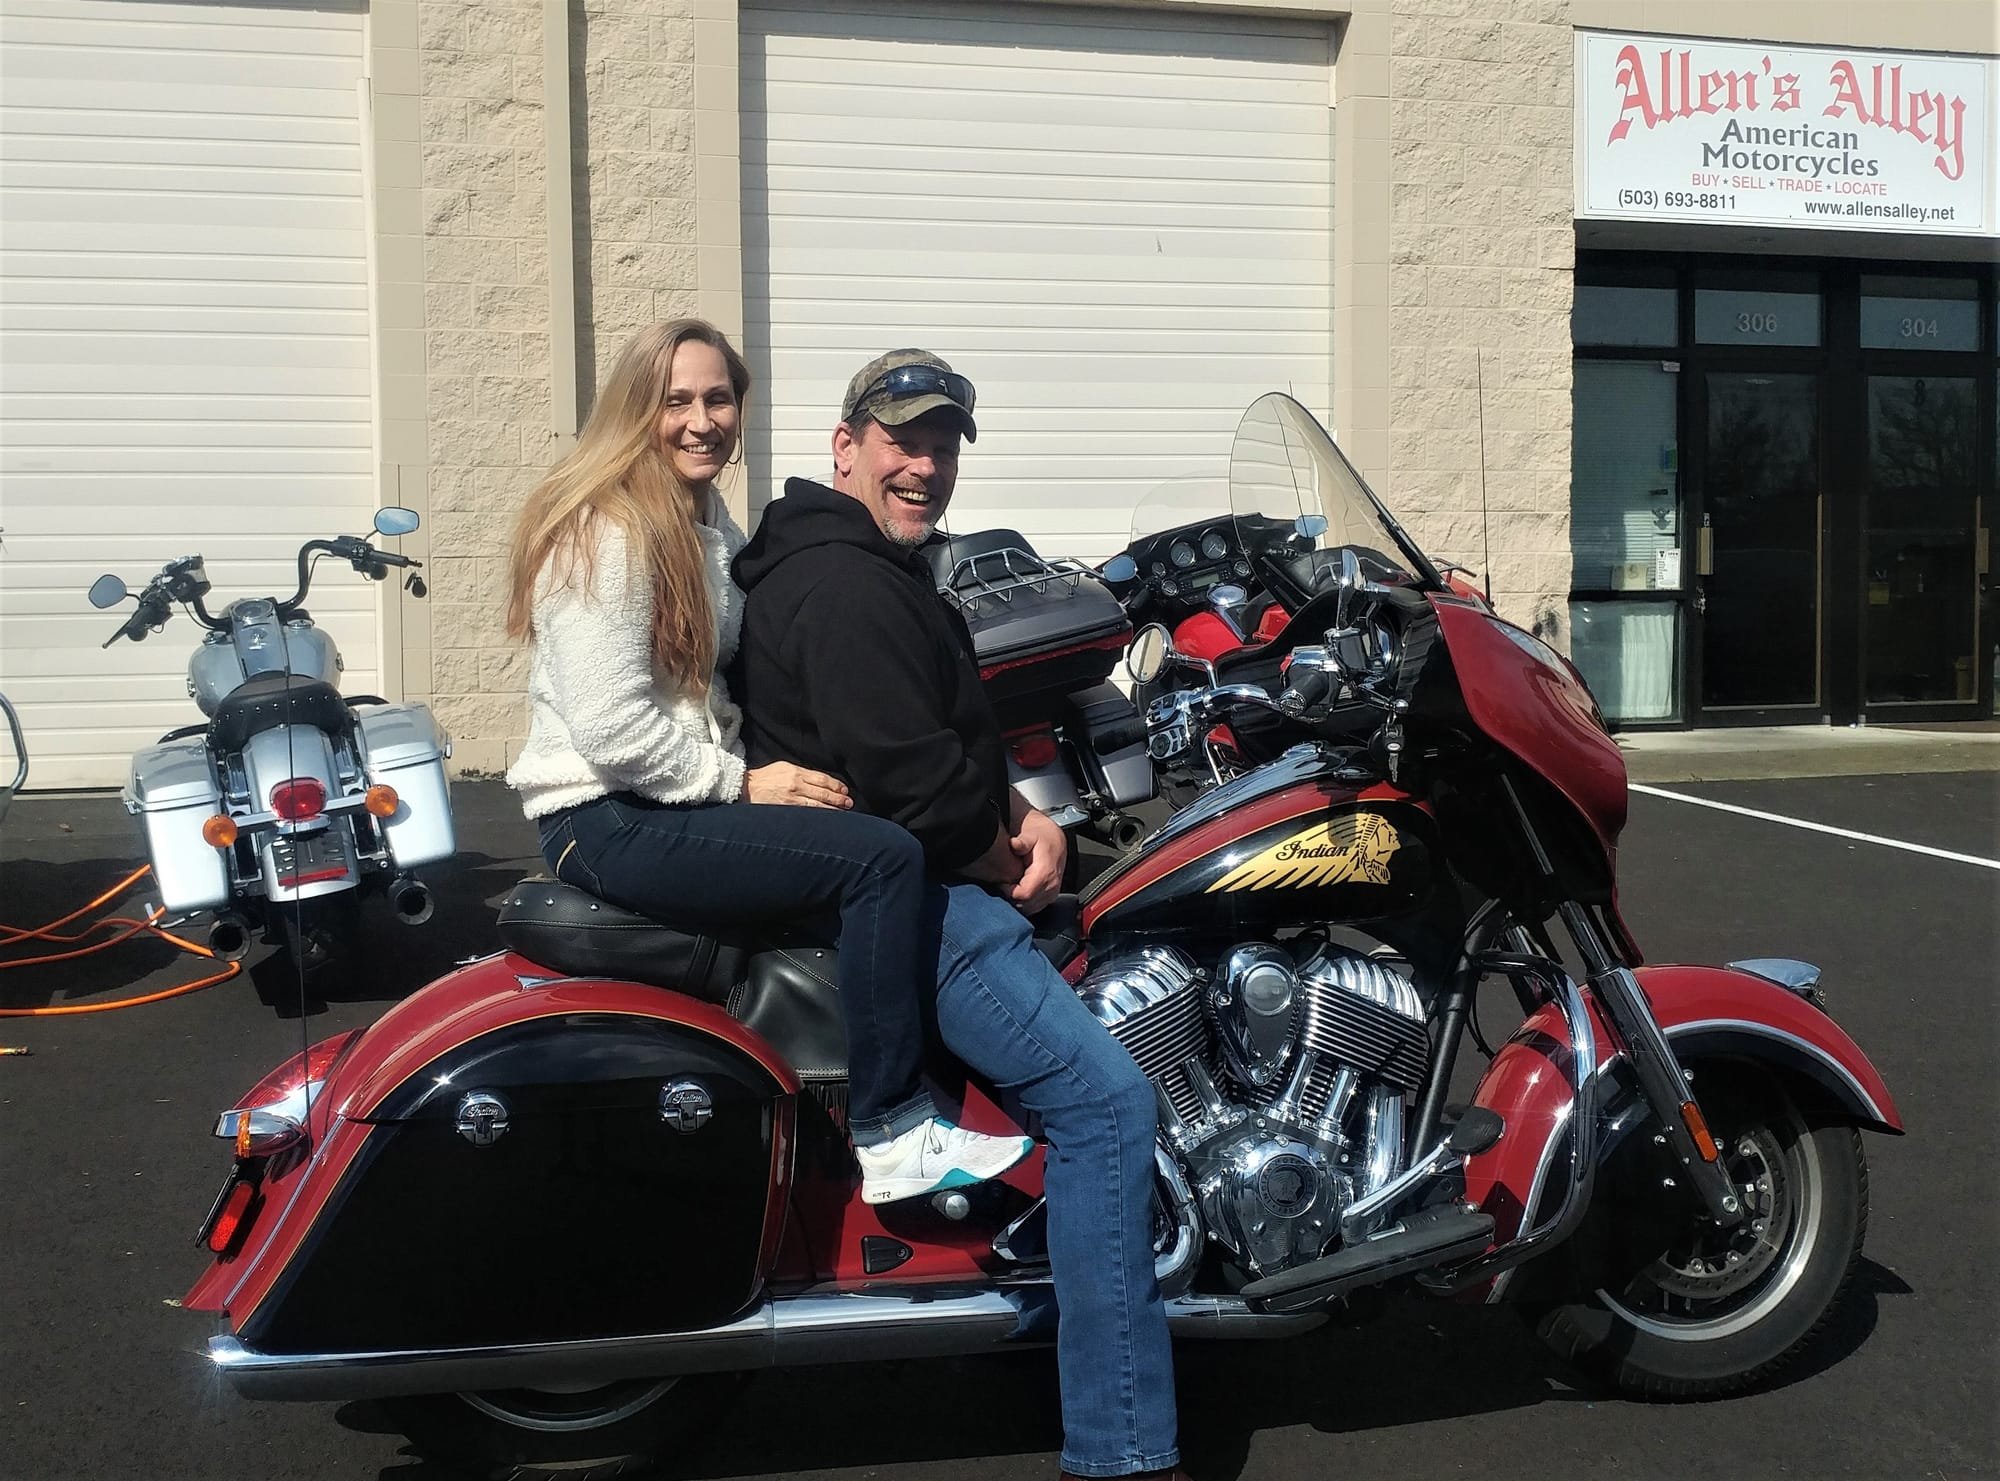 Joe and Marla Picking Up Their 2015 Indian Chieftain, I truly Appreciate Your Business.